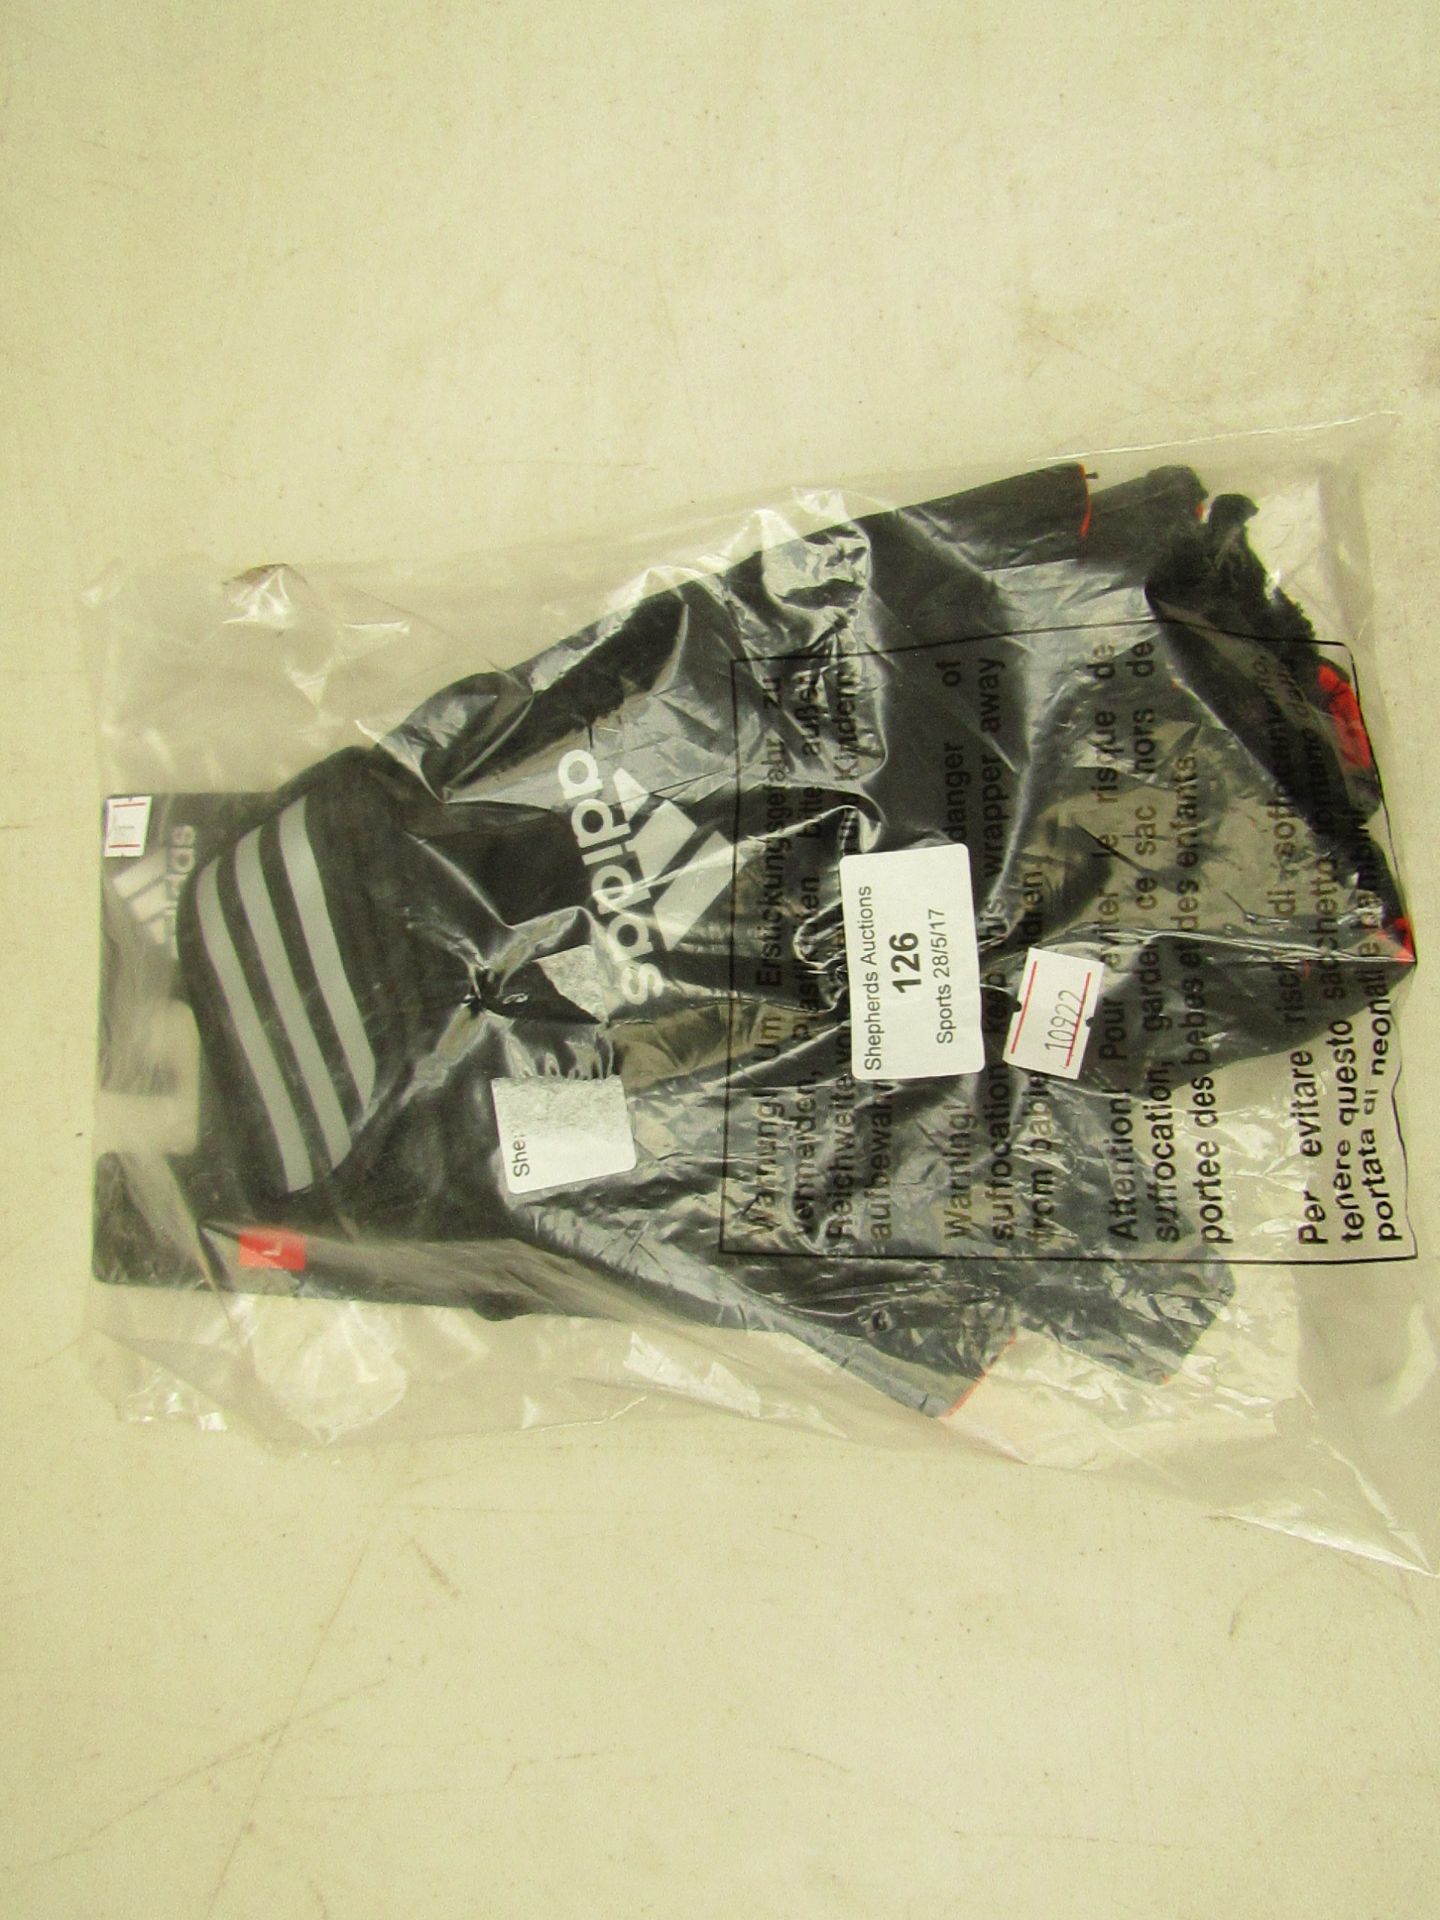 This lot contains.  - Adidas weightlifting gloves, new and packaged.  - speed rope, new and boxed.